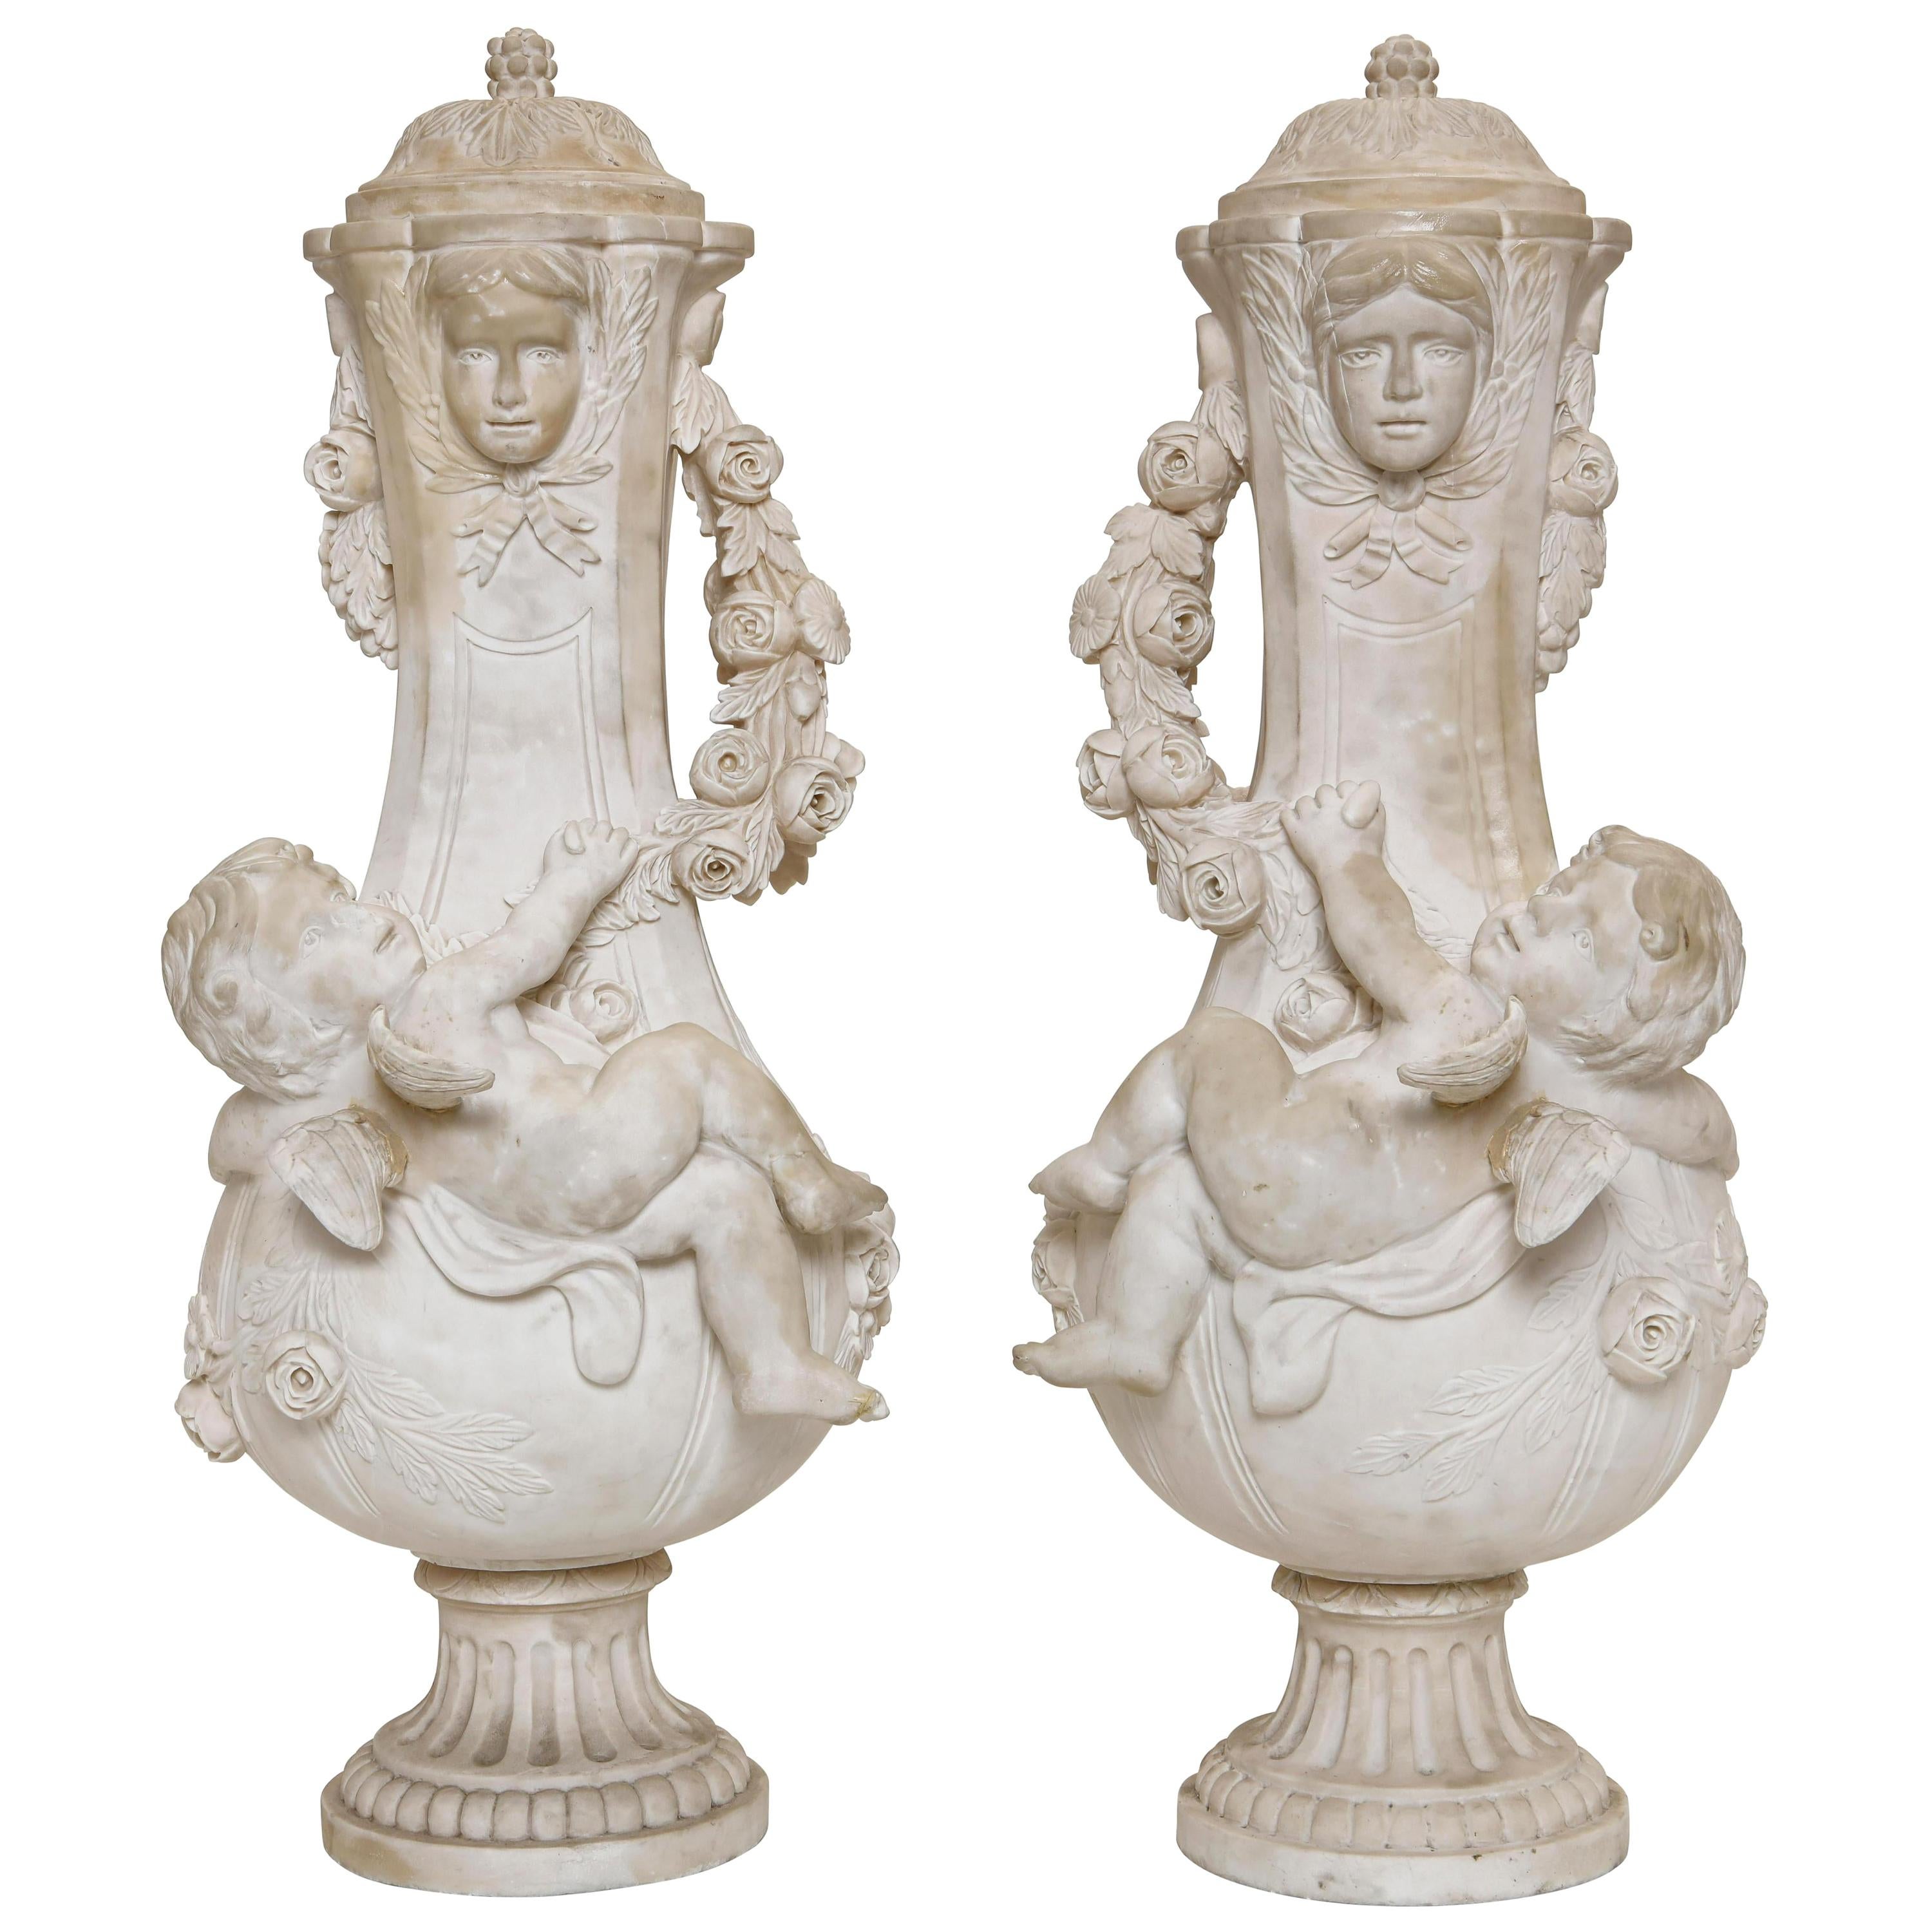 Pair of Marble Urns with Cherubs, Signed A. Moreau